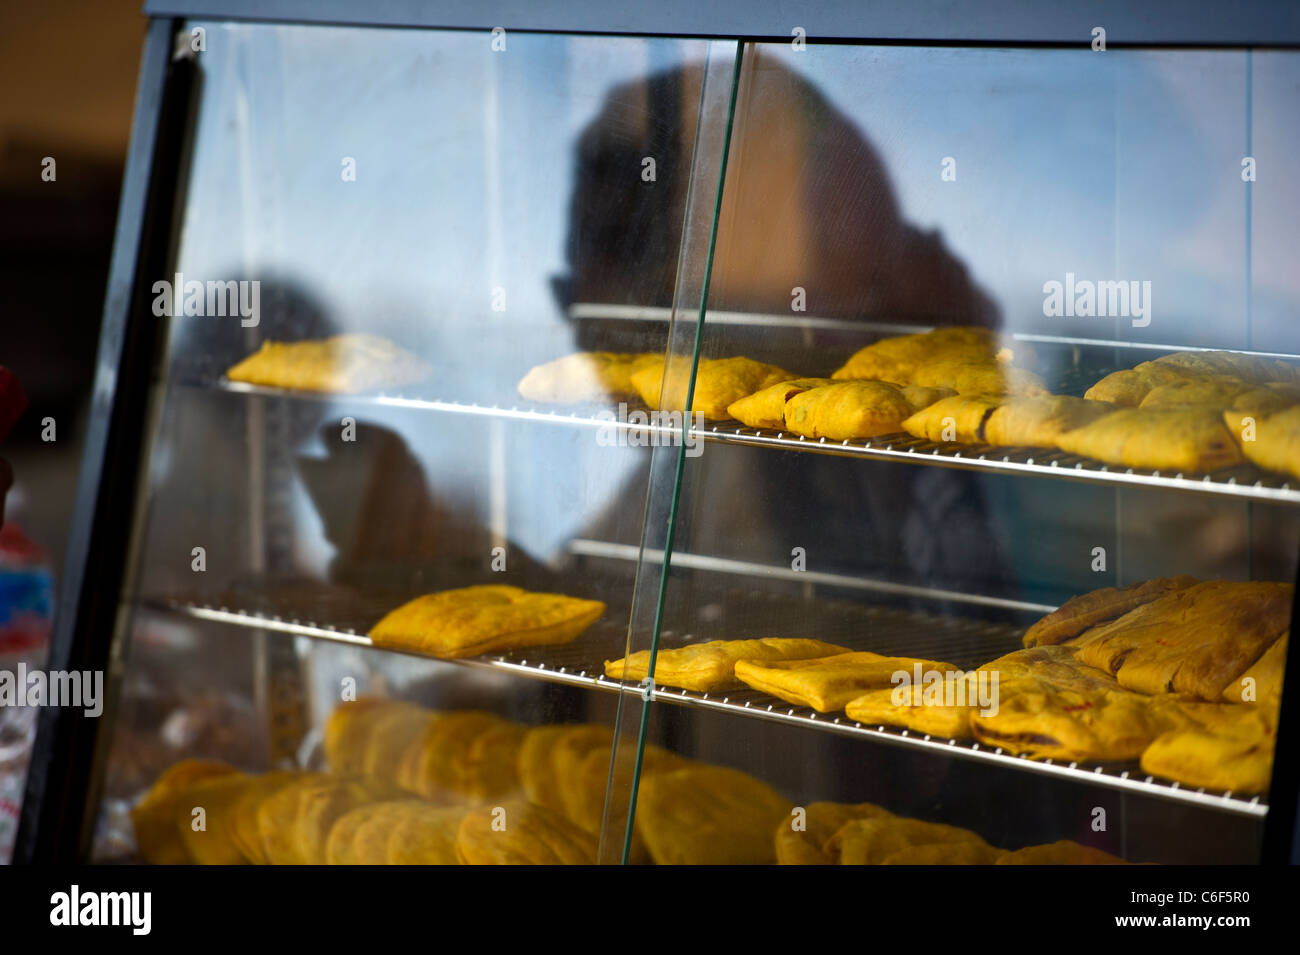 Pastry display case with customer reflection Stock Photo